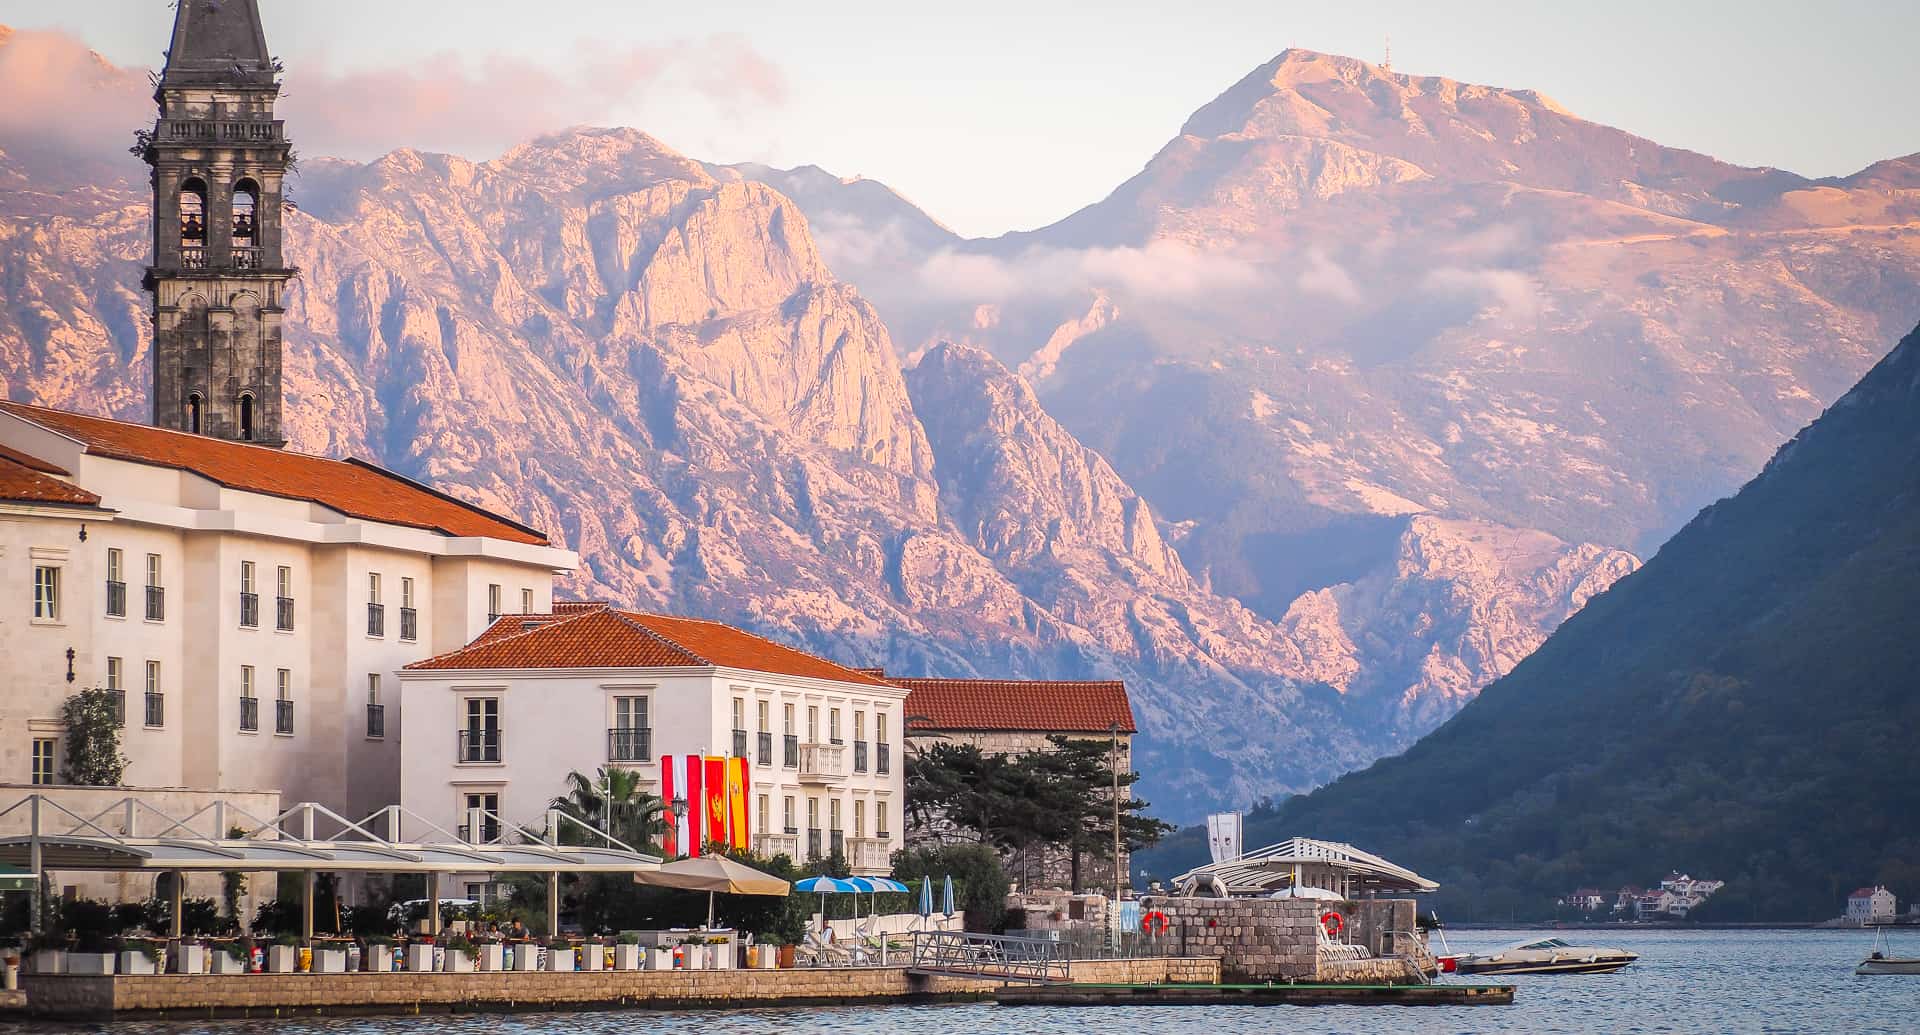 A complete guide to Perast, Montenegro, including the top things to do in Perast